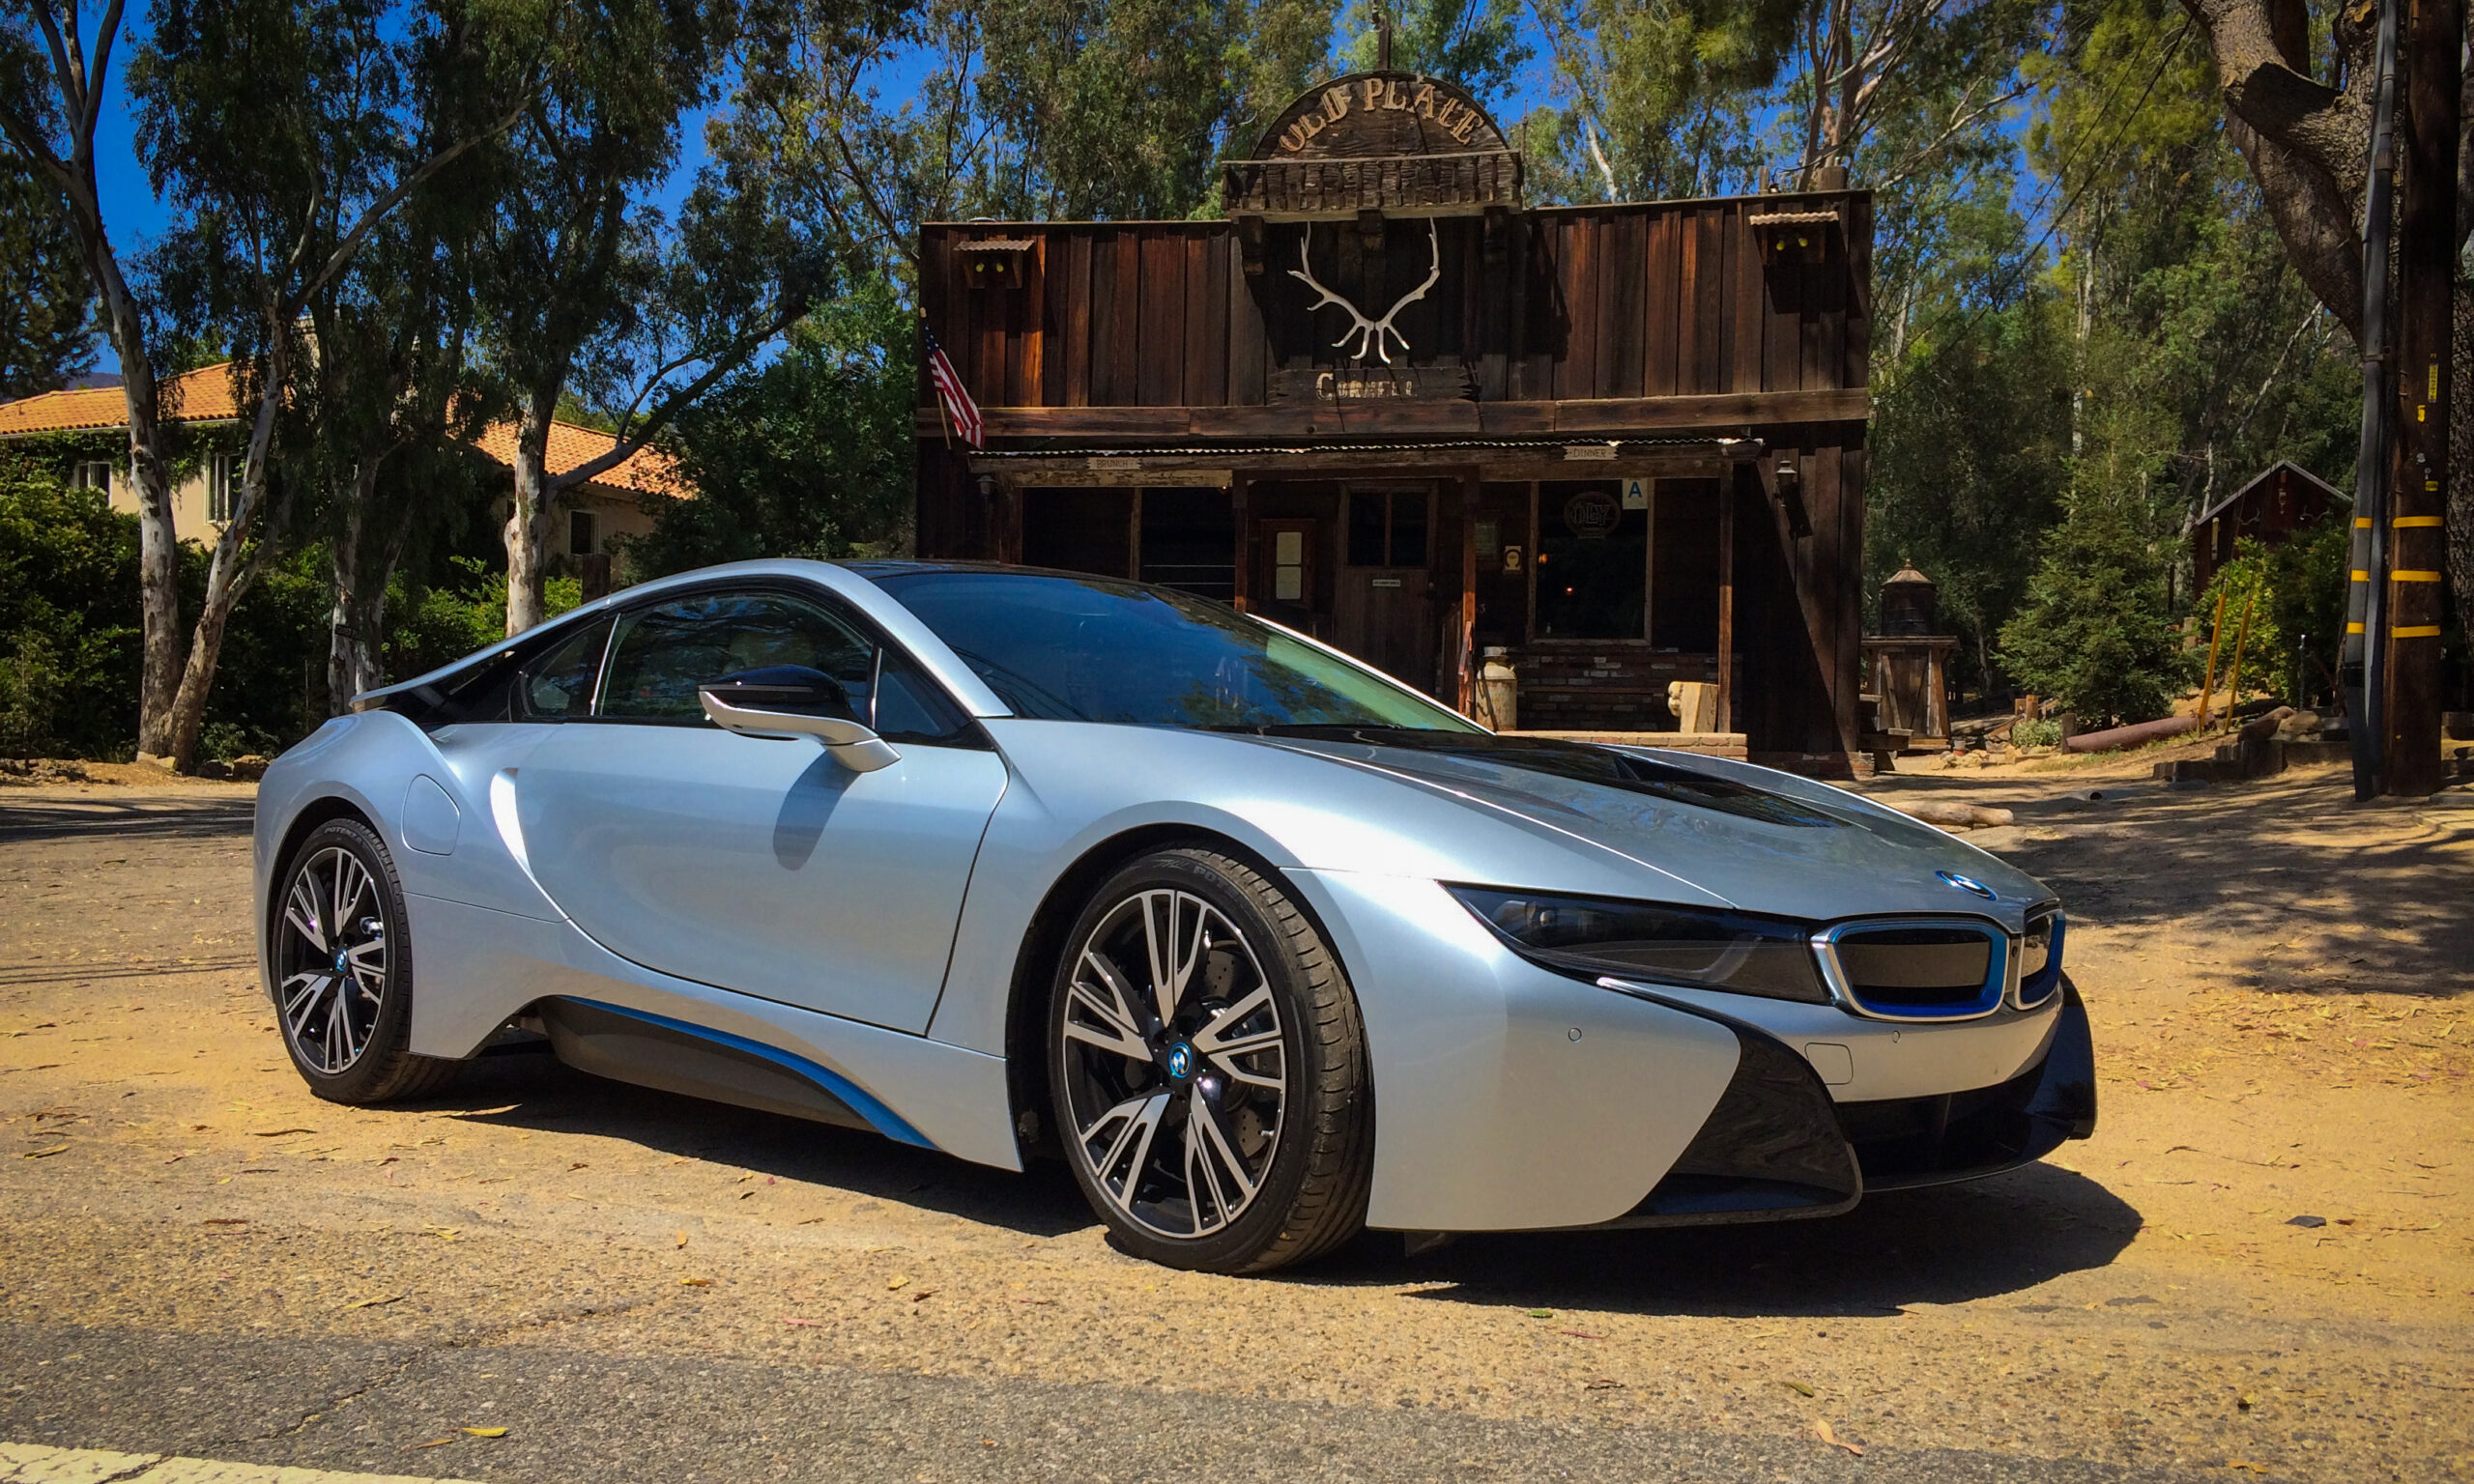 First Drive: 2015 BMW i8. The Future Is Here.